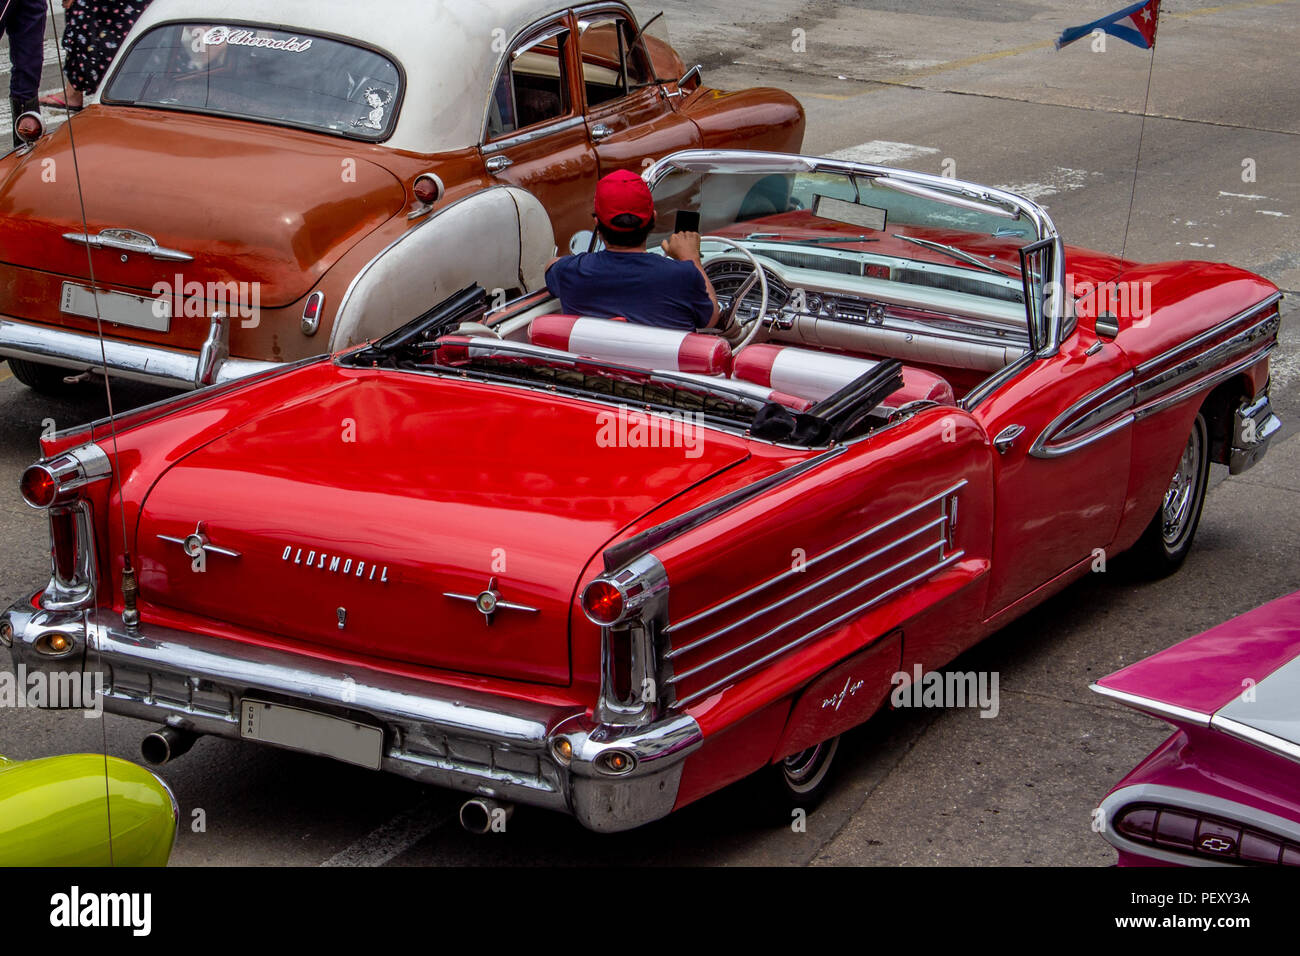 Red vintage car in Havana from above, open topped car Stock Photo